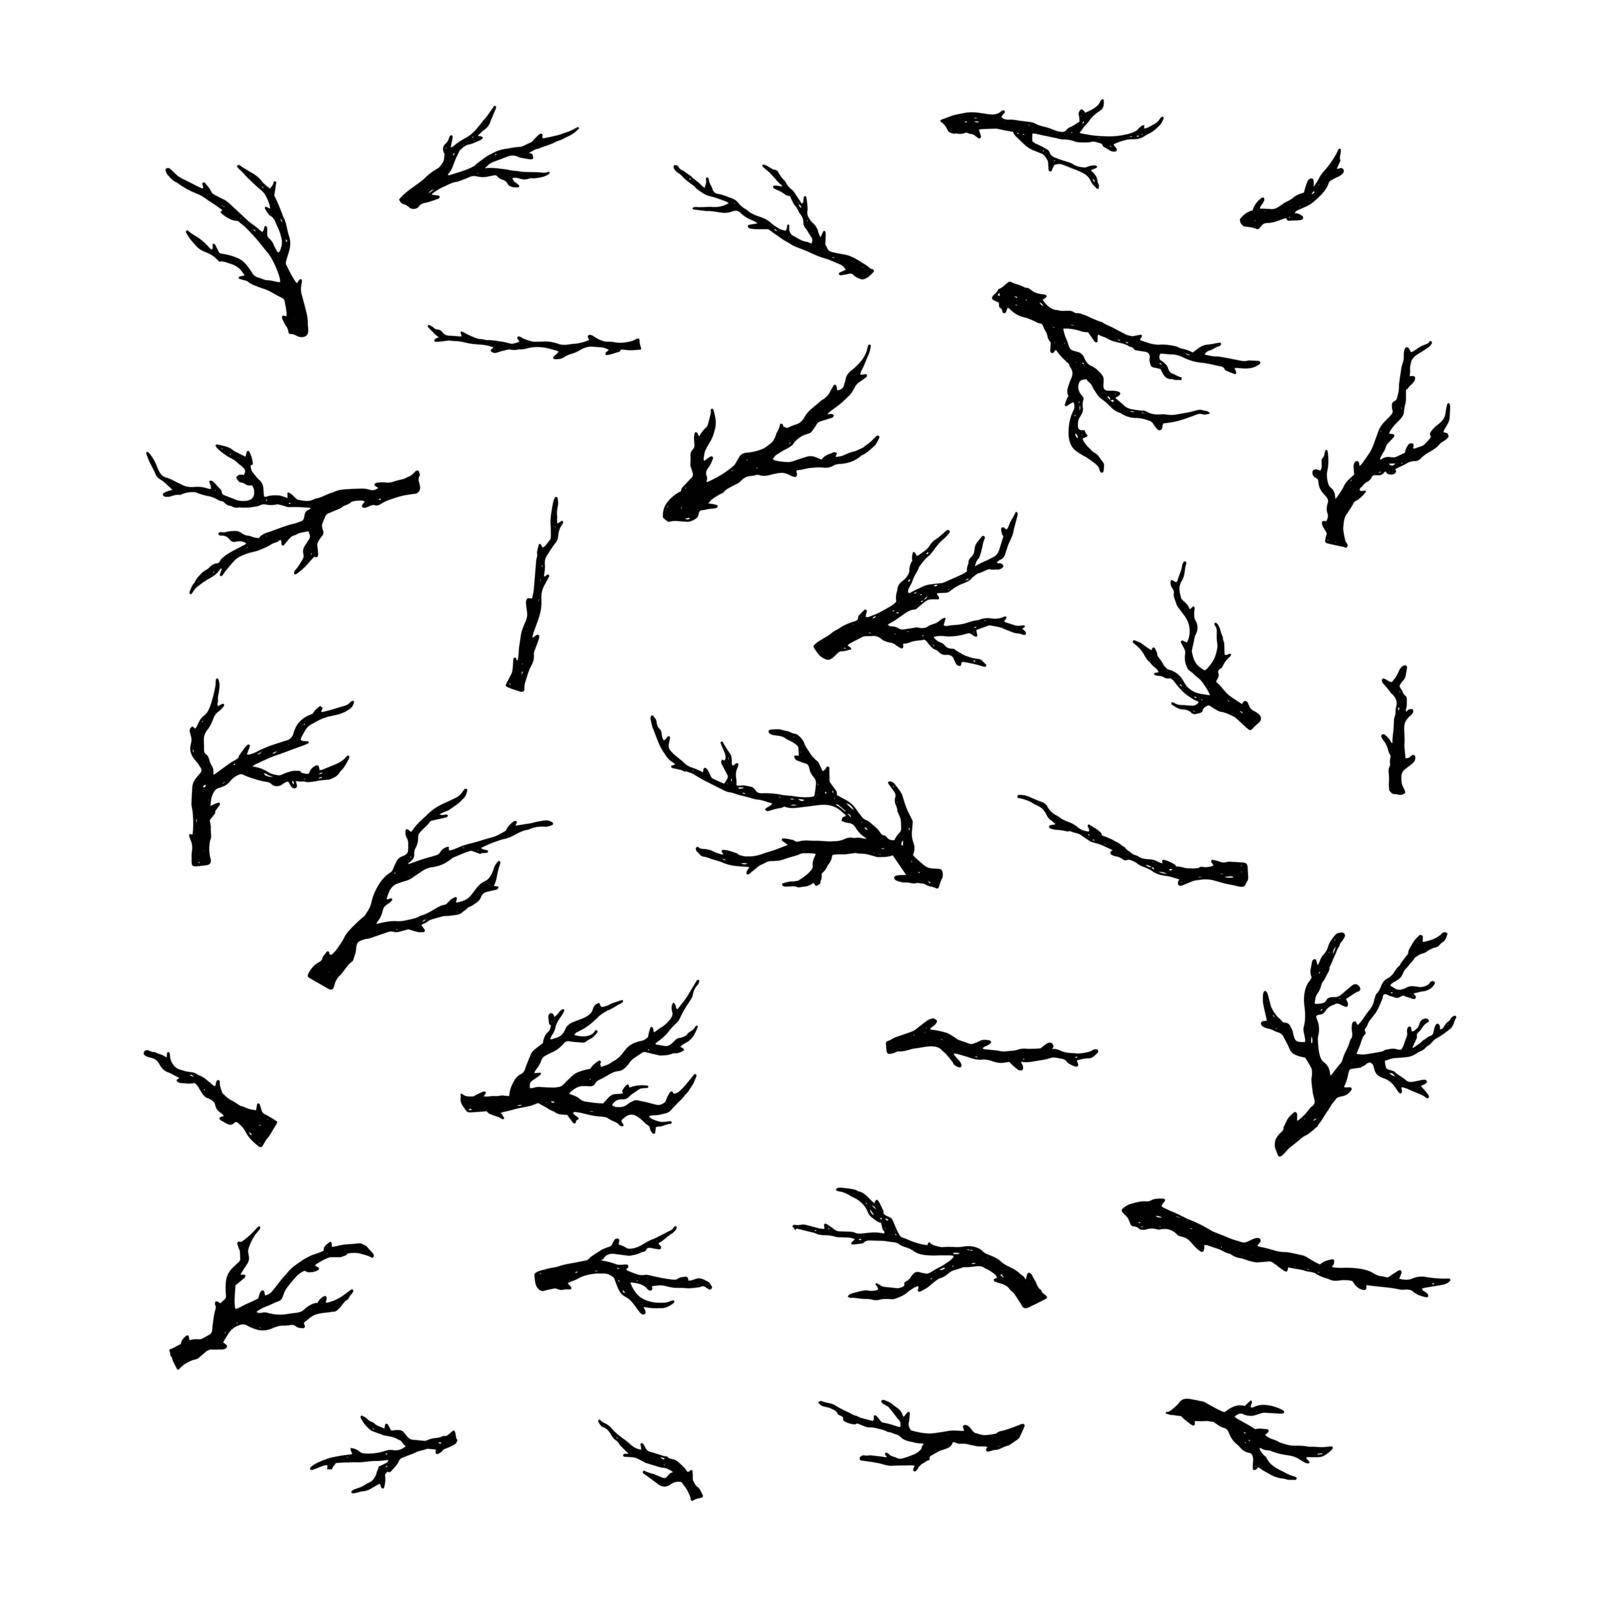 Set of hand painted black ink tree branches and twigs isolated on white background.